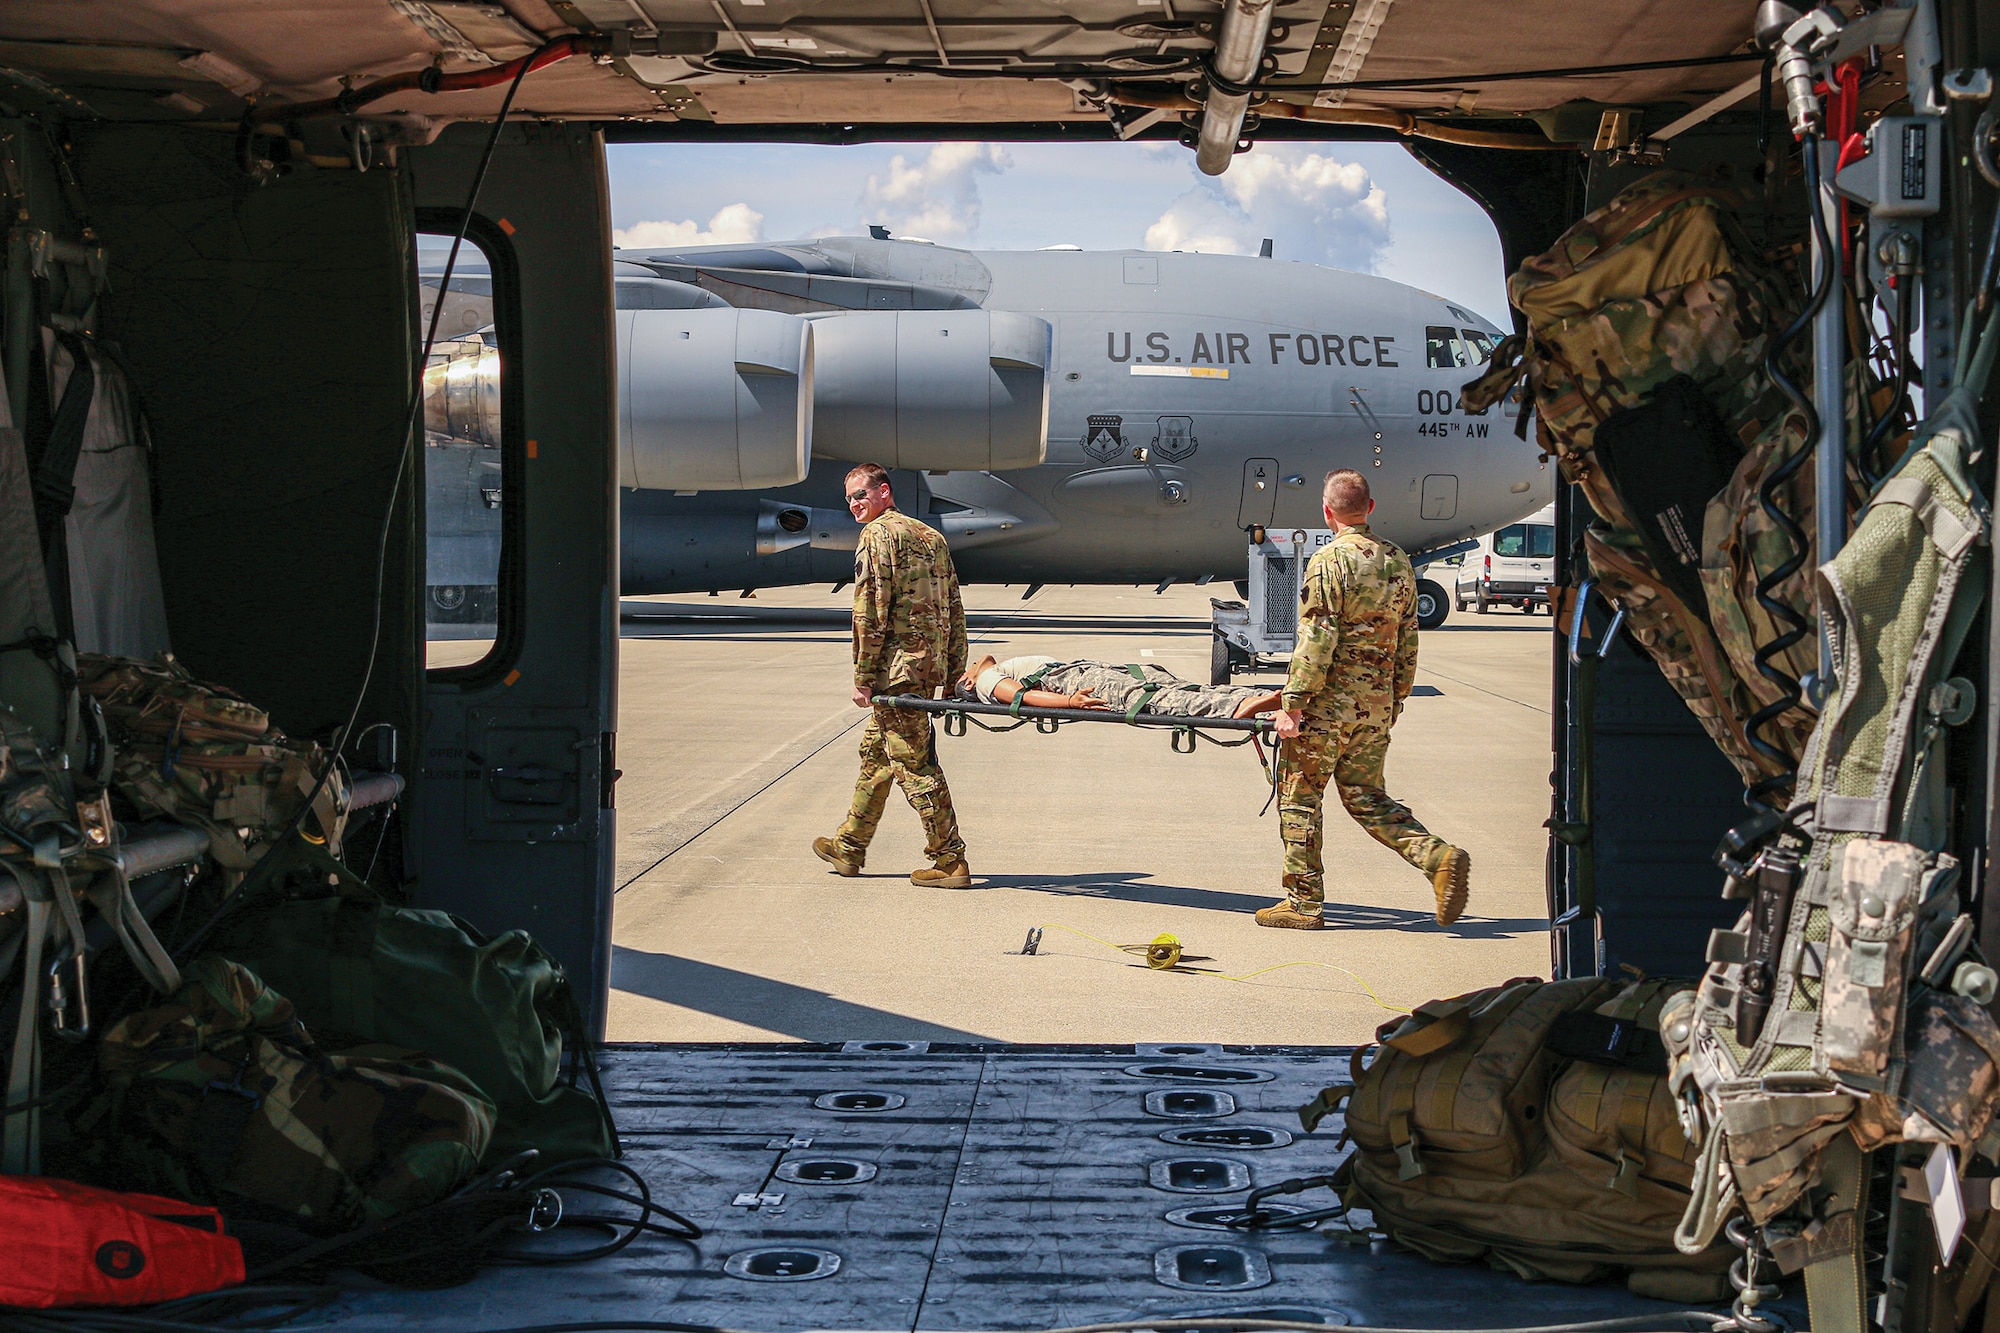 West Virginia Army National Guard Charlie Company 2nd General Support Battalion 104th Aviation Regiment soldiers transport a mock patient to a C-17 Globemaster III during training with the 445th Airlift Wing and the U.S. Air Force School of Aerospace Medicine May 14, 2022.